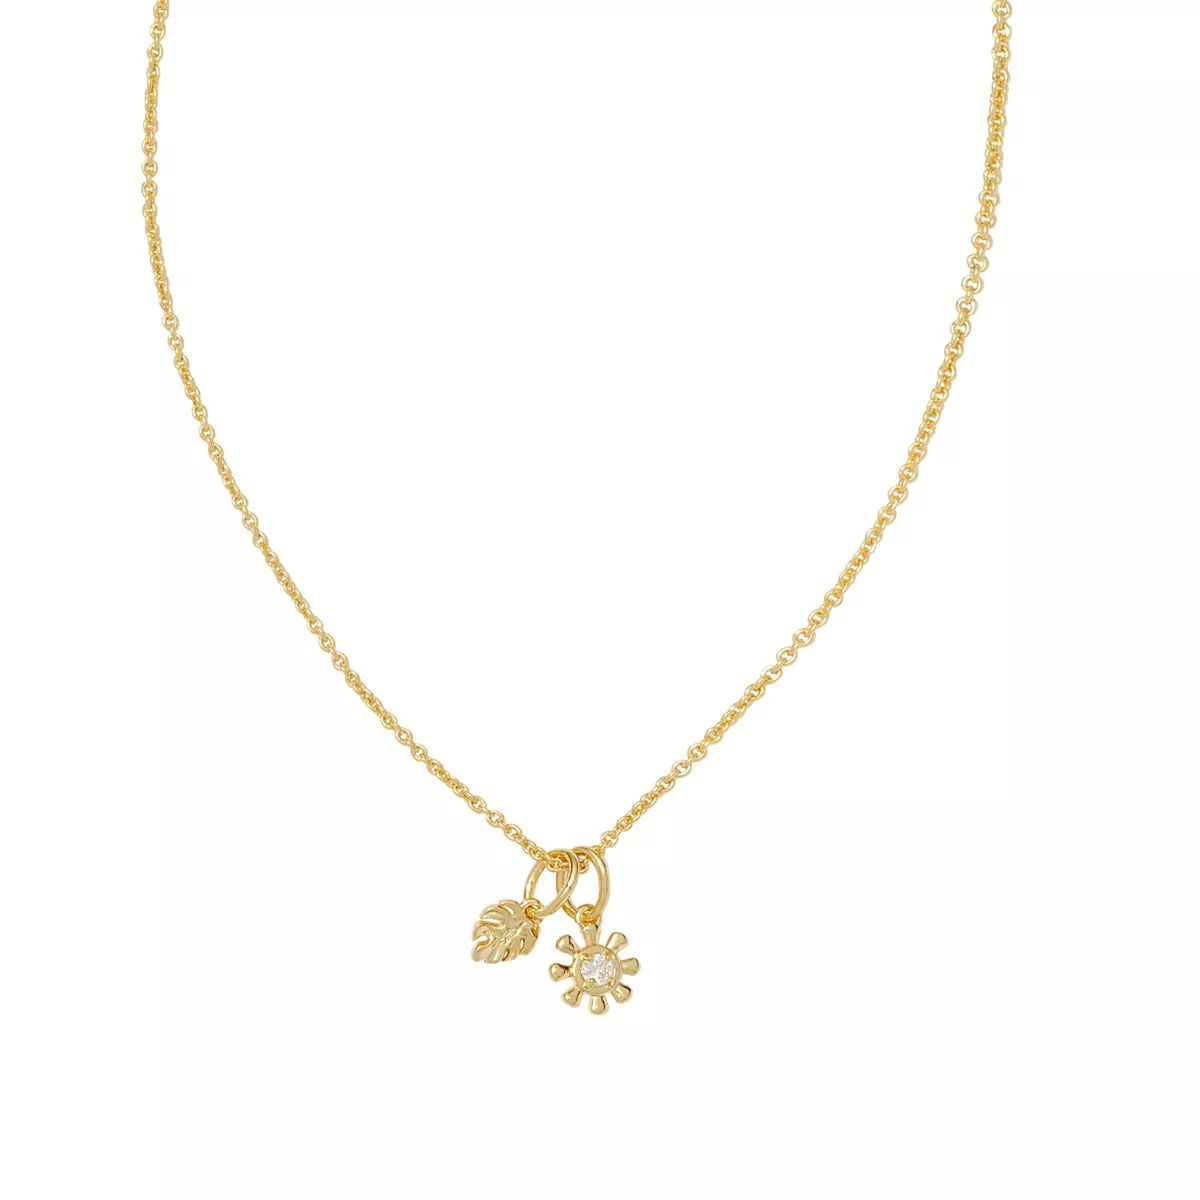 Kendra Scott Leigh Charm Necklace - Gold | Target